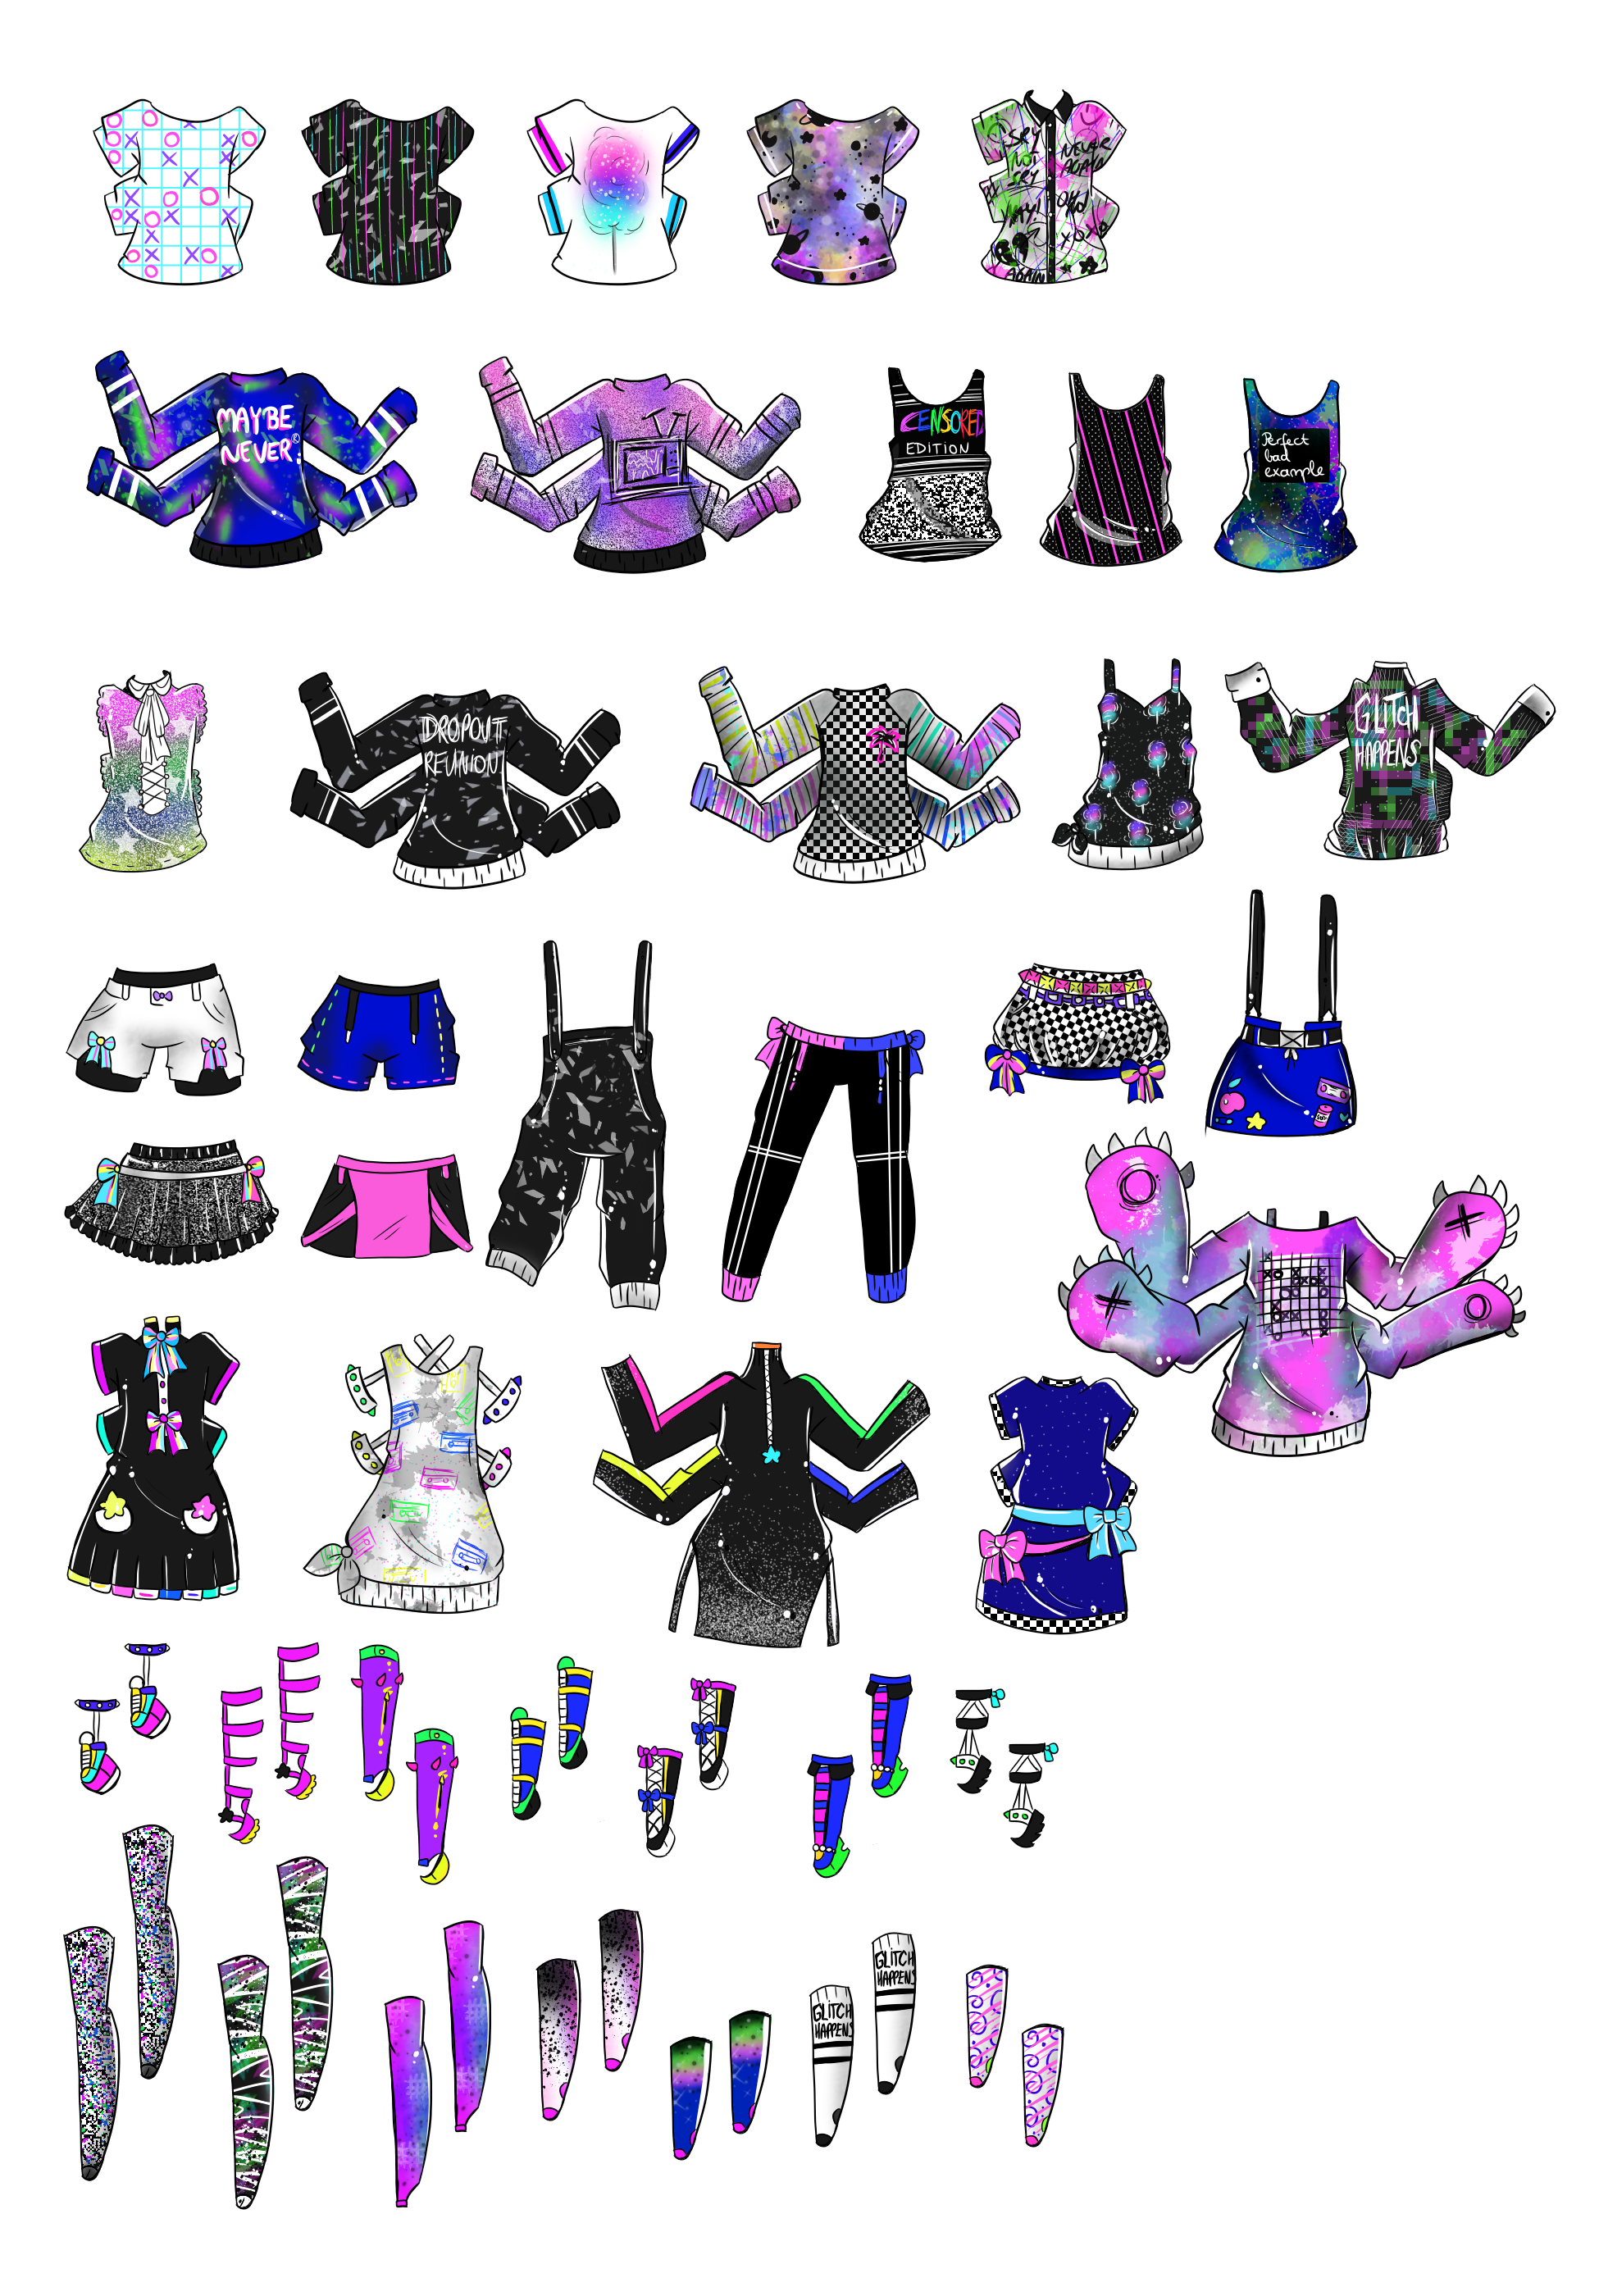 Custom MixandMatch outfits-Neon GlitchCore by Guppie-Vibes on